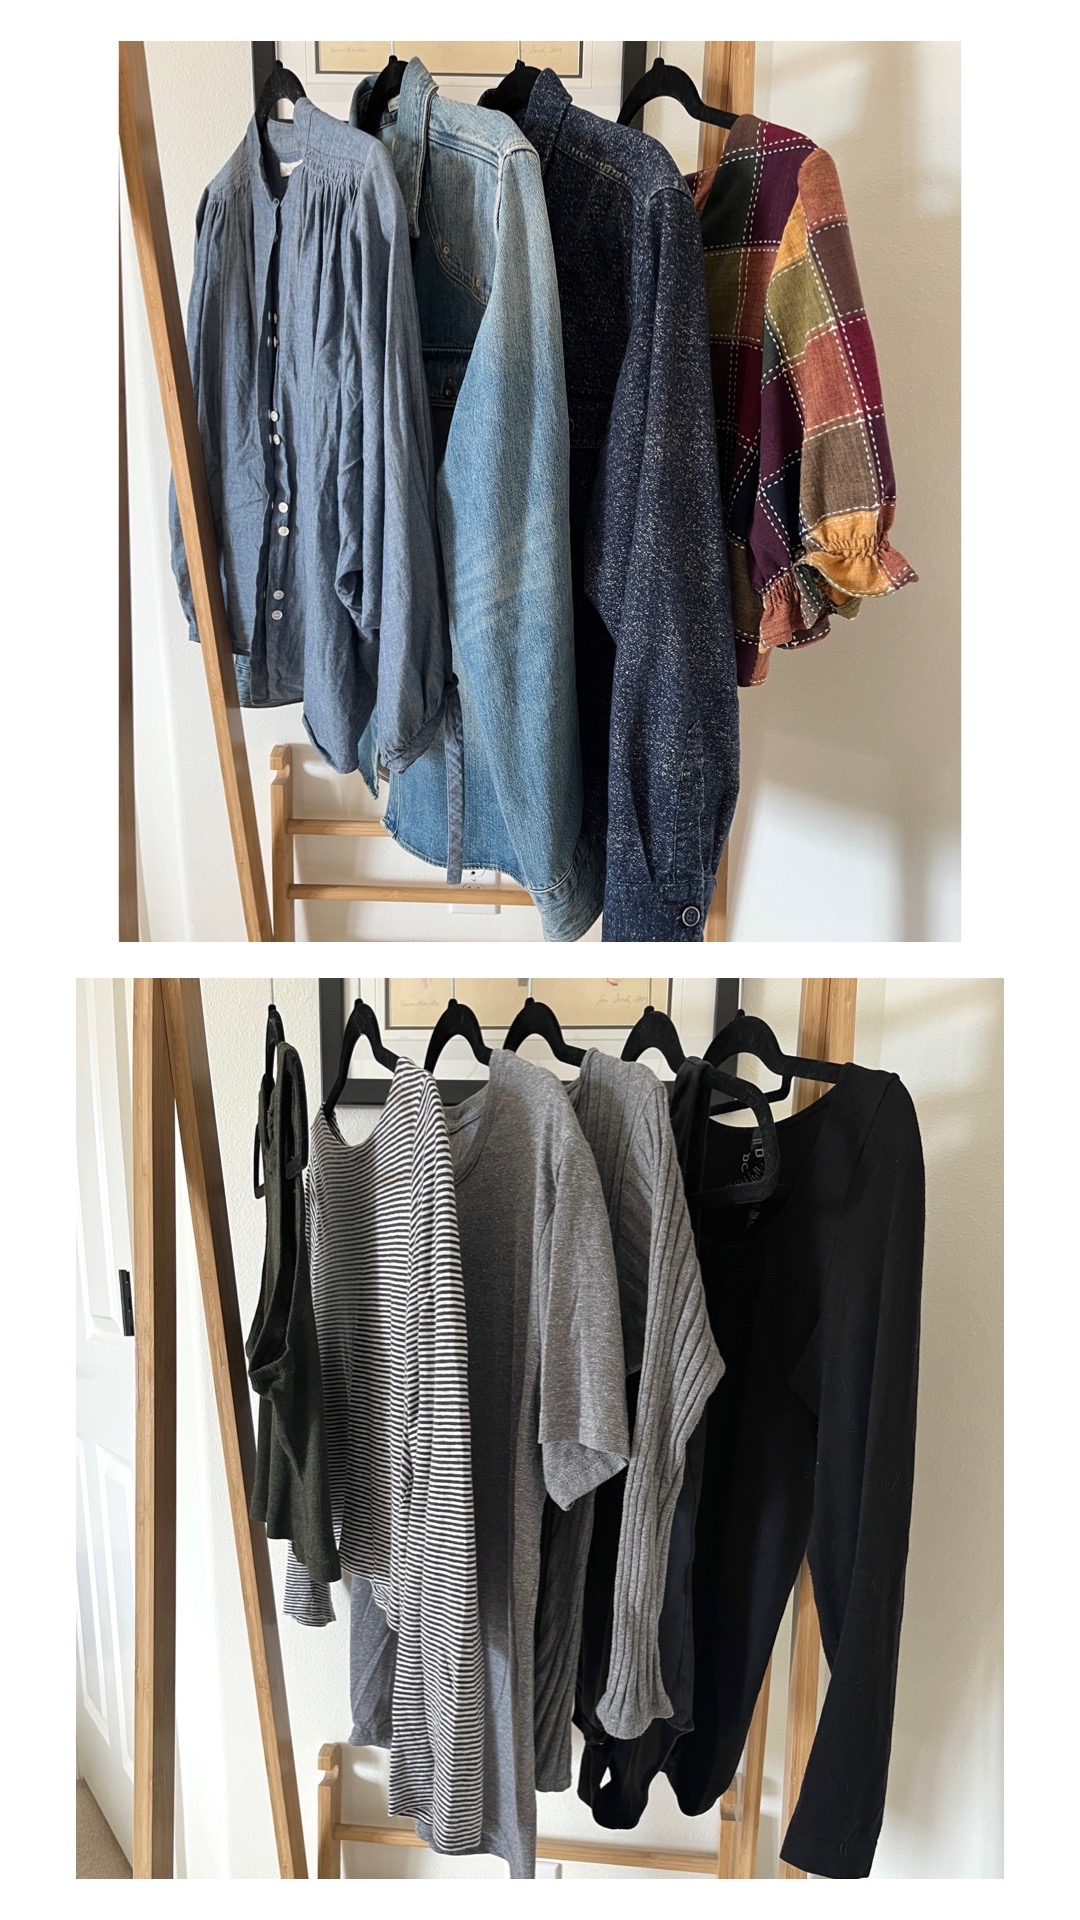 individual categories in my spring capsule wardrobe: there are 2 photos, one on top of the other. The top one has 2 shirts and 2 blouses hanging from the railing. The bottom one has 6 tops hanging from the railing.